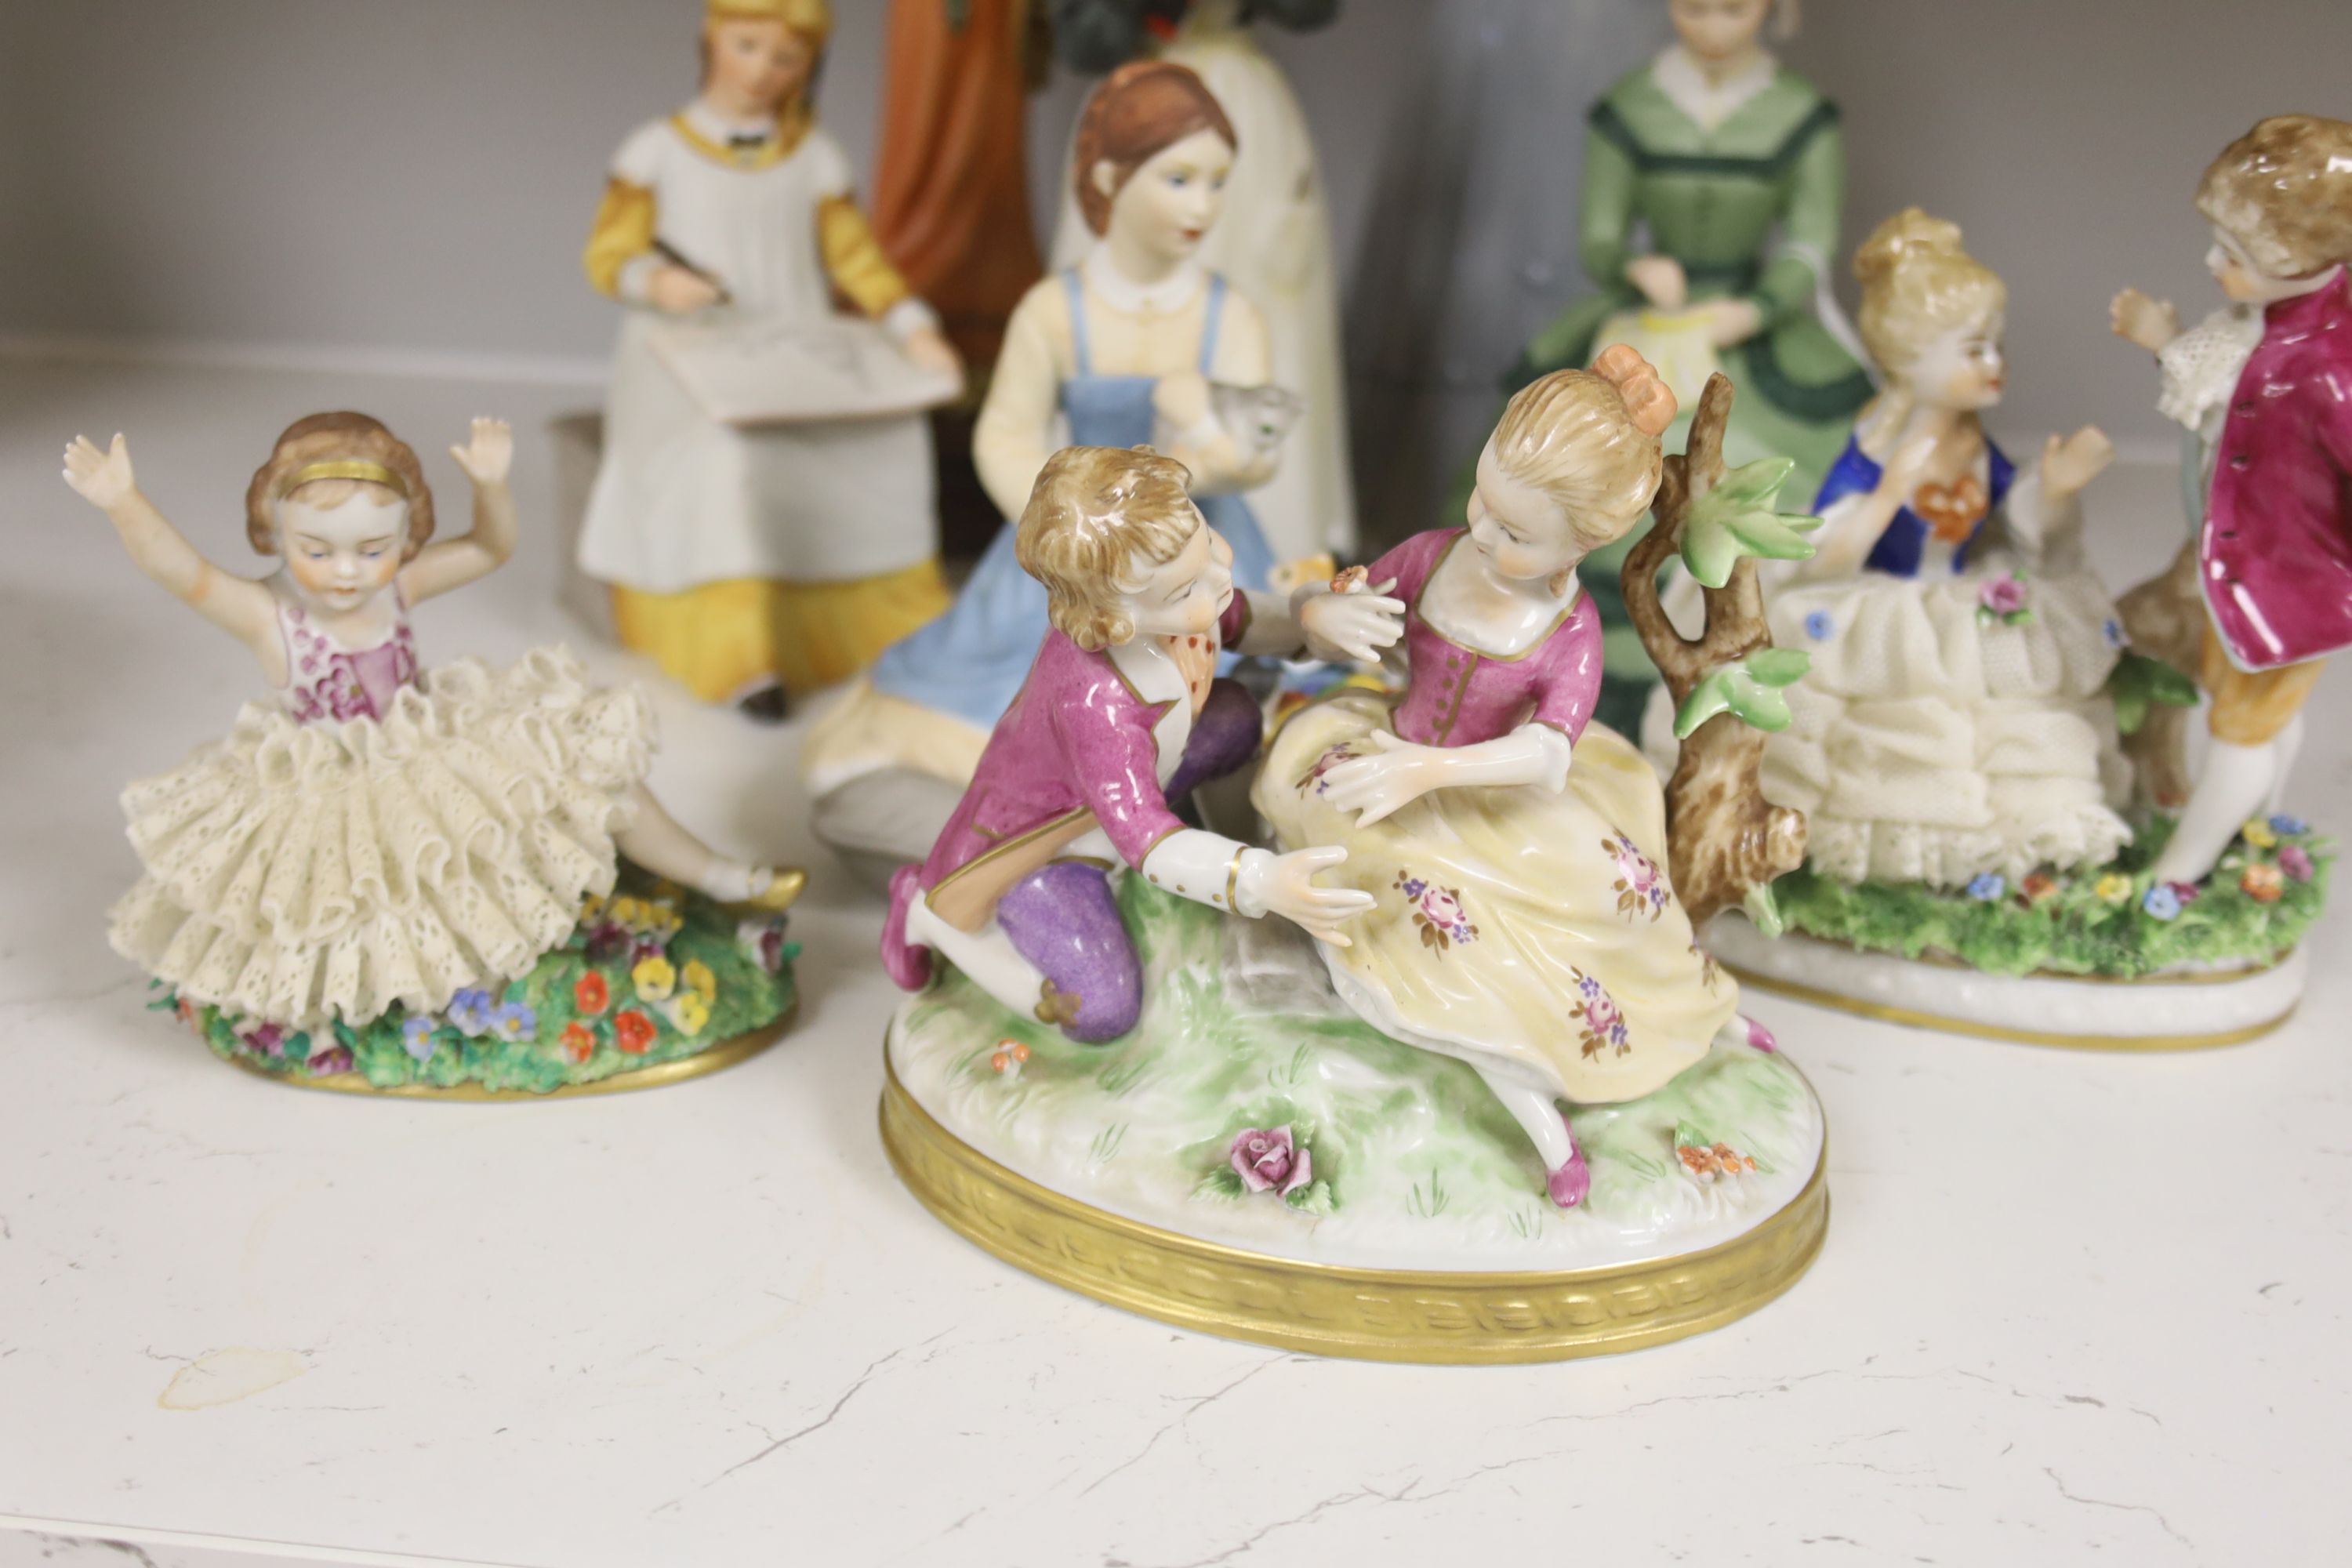 A German porcelain group of two children by a tree stump, on rocky base, two 'crinoline' figures and six other porcelain groups